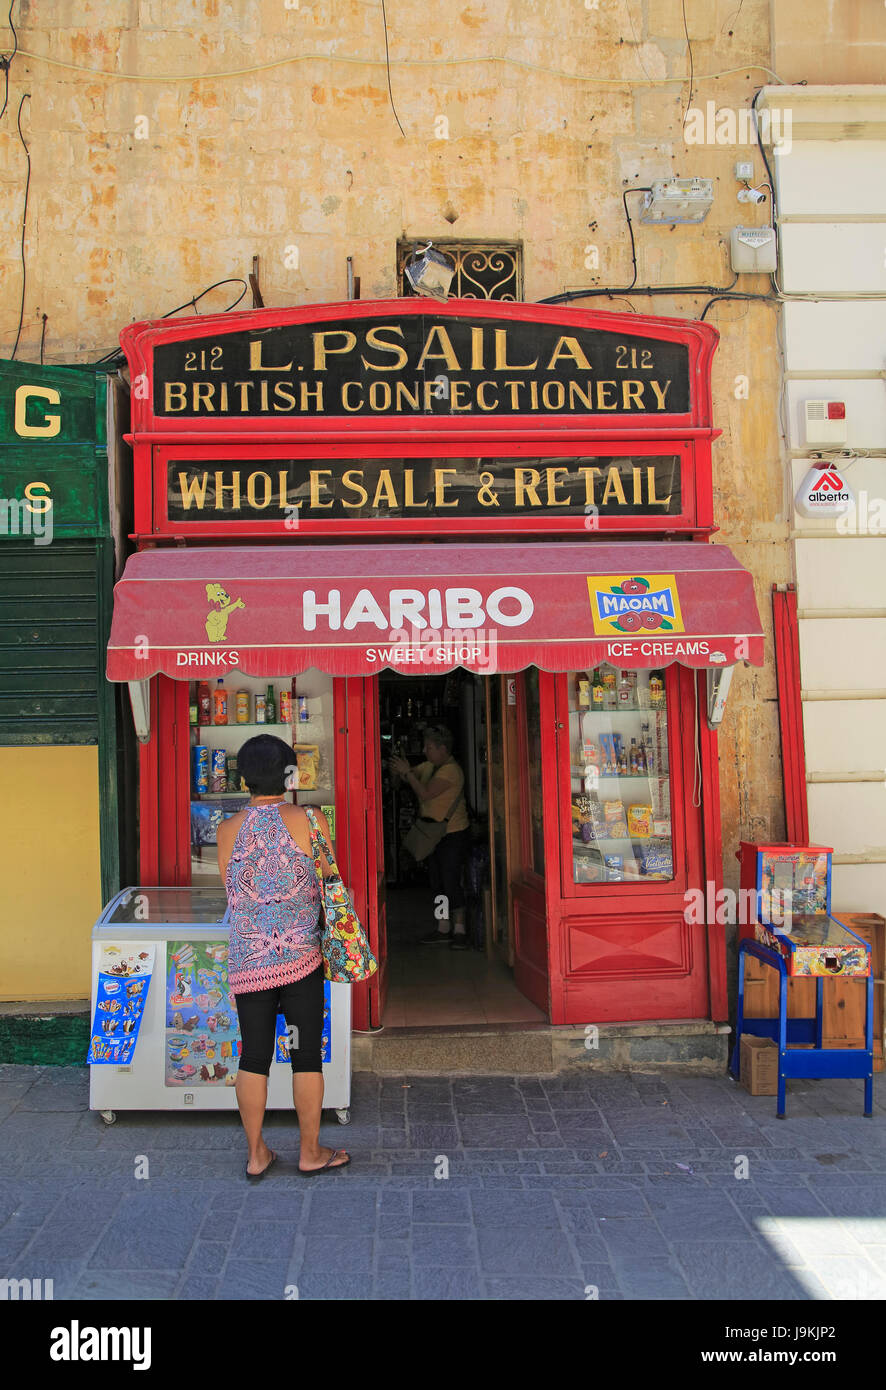 British traditional confectionery shop wholesale and retail in Valletta, Malta Stock Photo